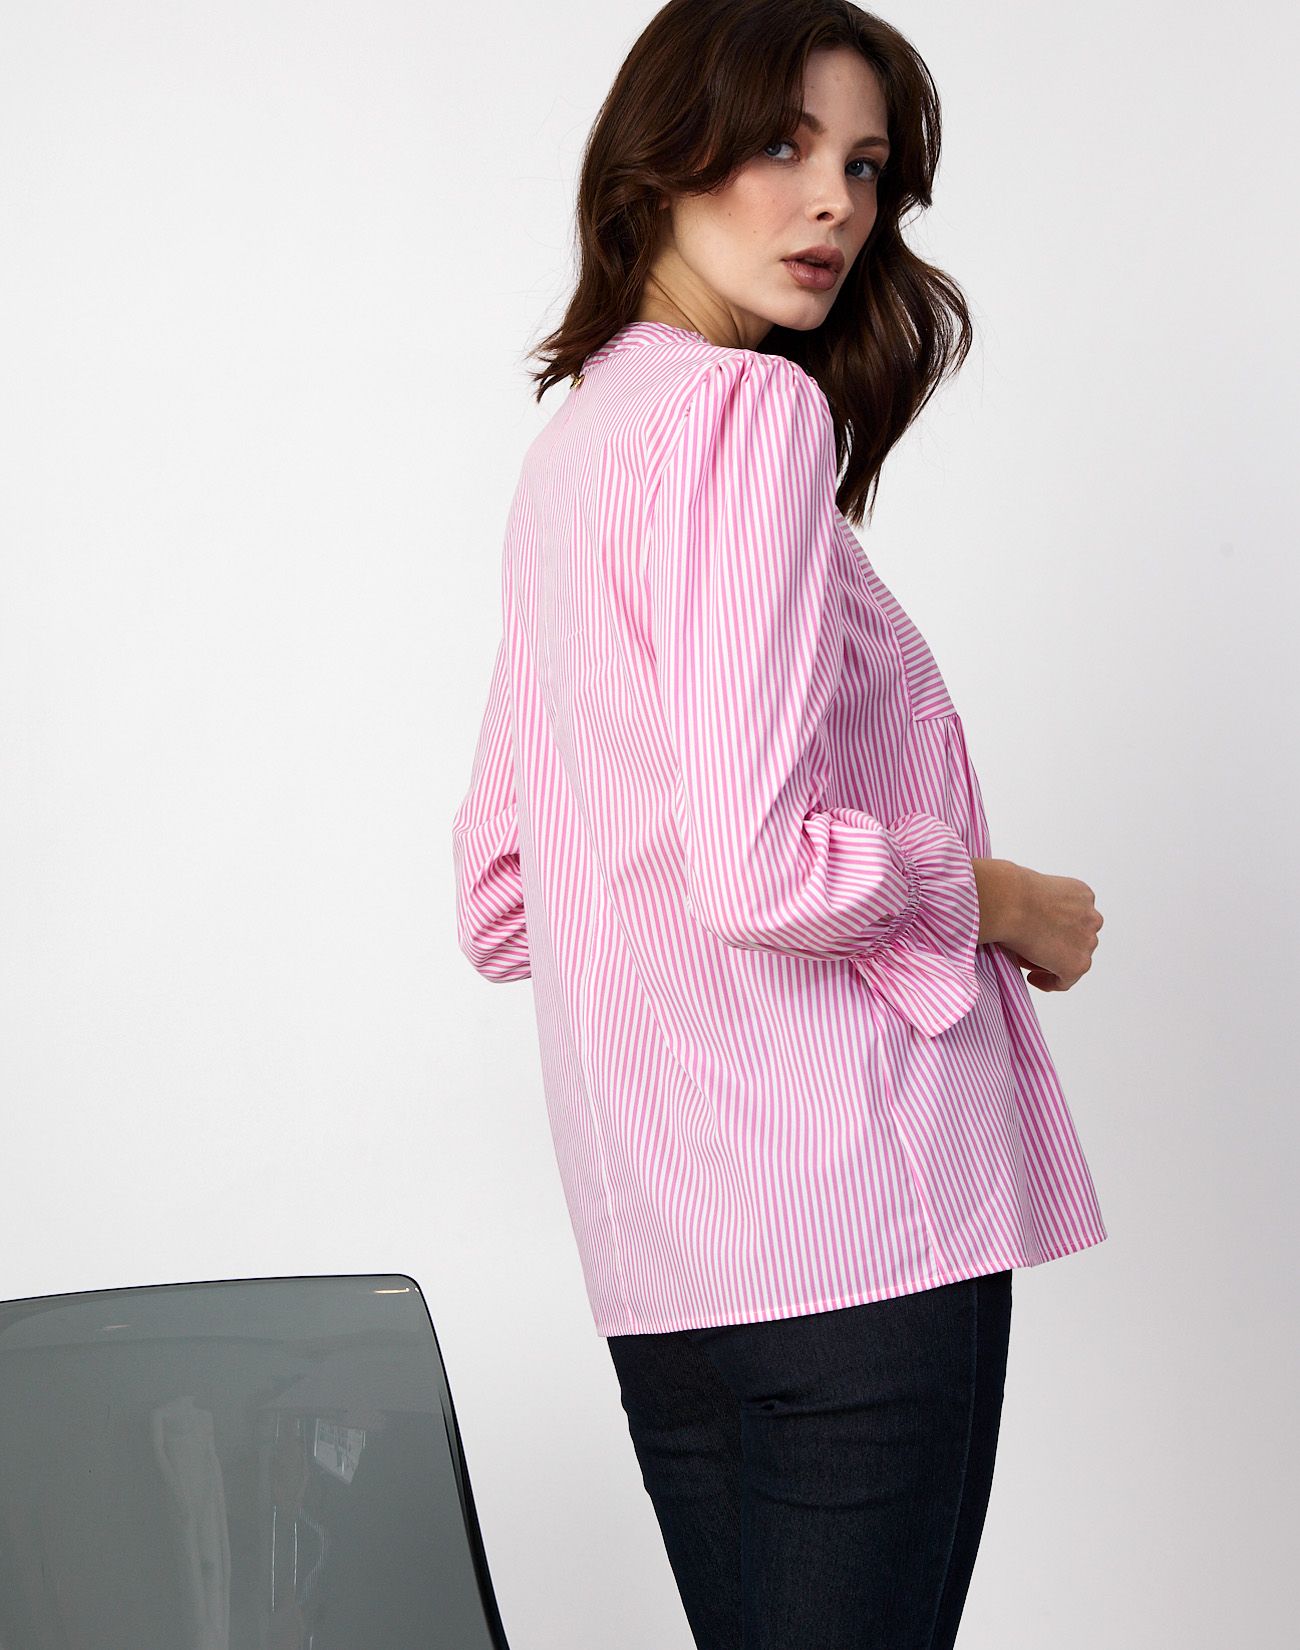 Striped shirt with pleating detail